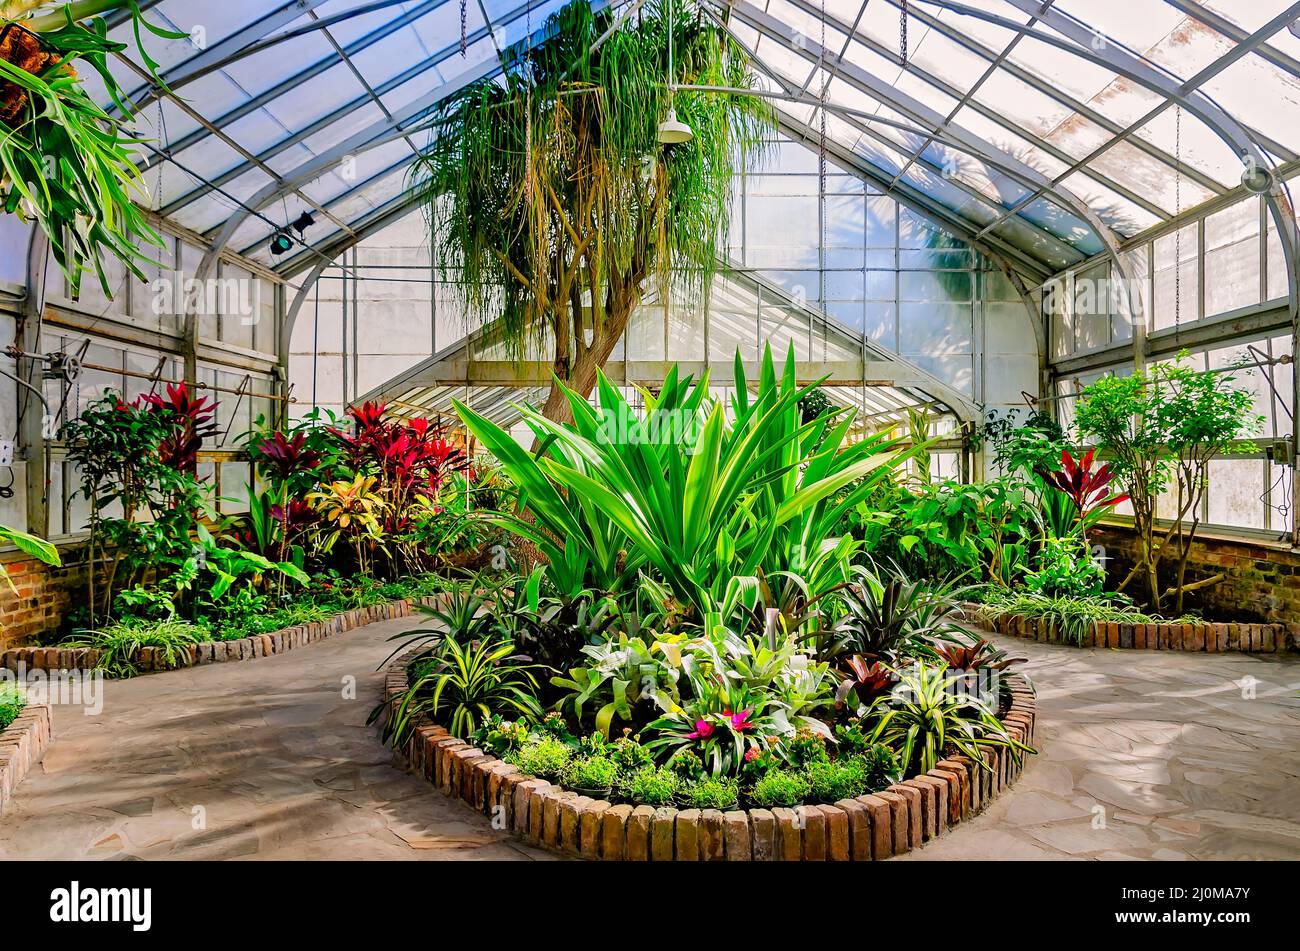 Plants grow in the Bellingrath Gardens conservatory, March 4, 2022, in Theodore, Alabama. The coal-heated hothouse was built in 1935. Stock Photo